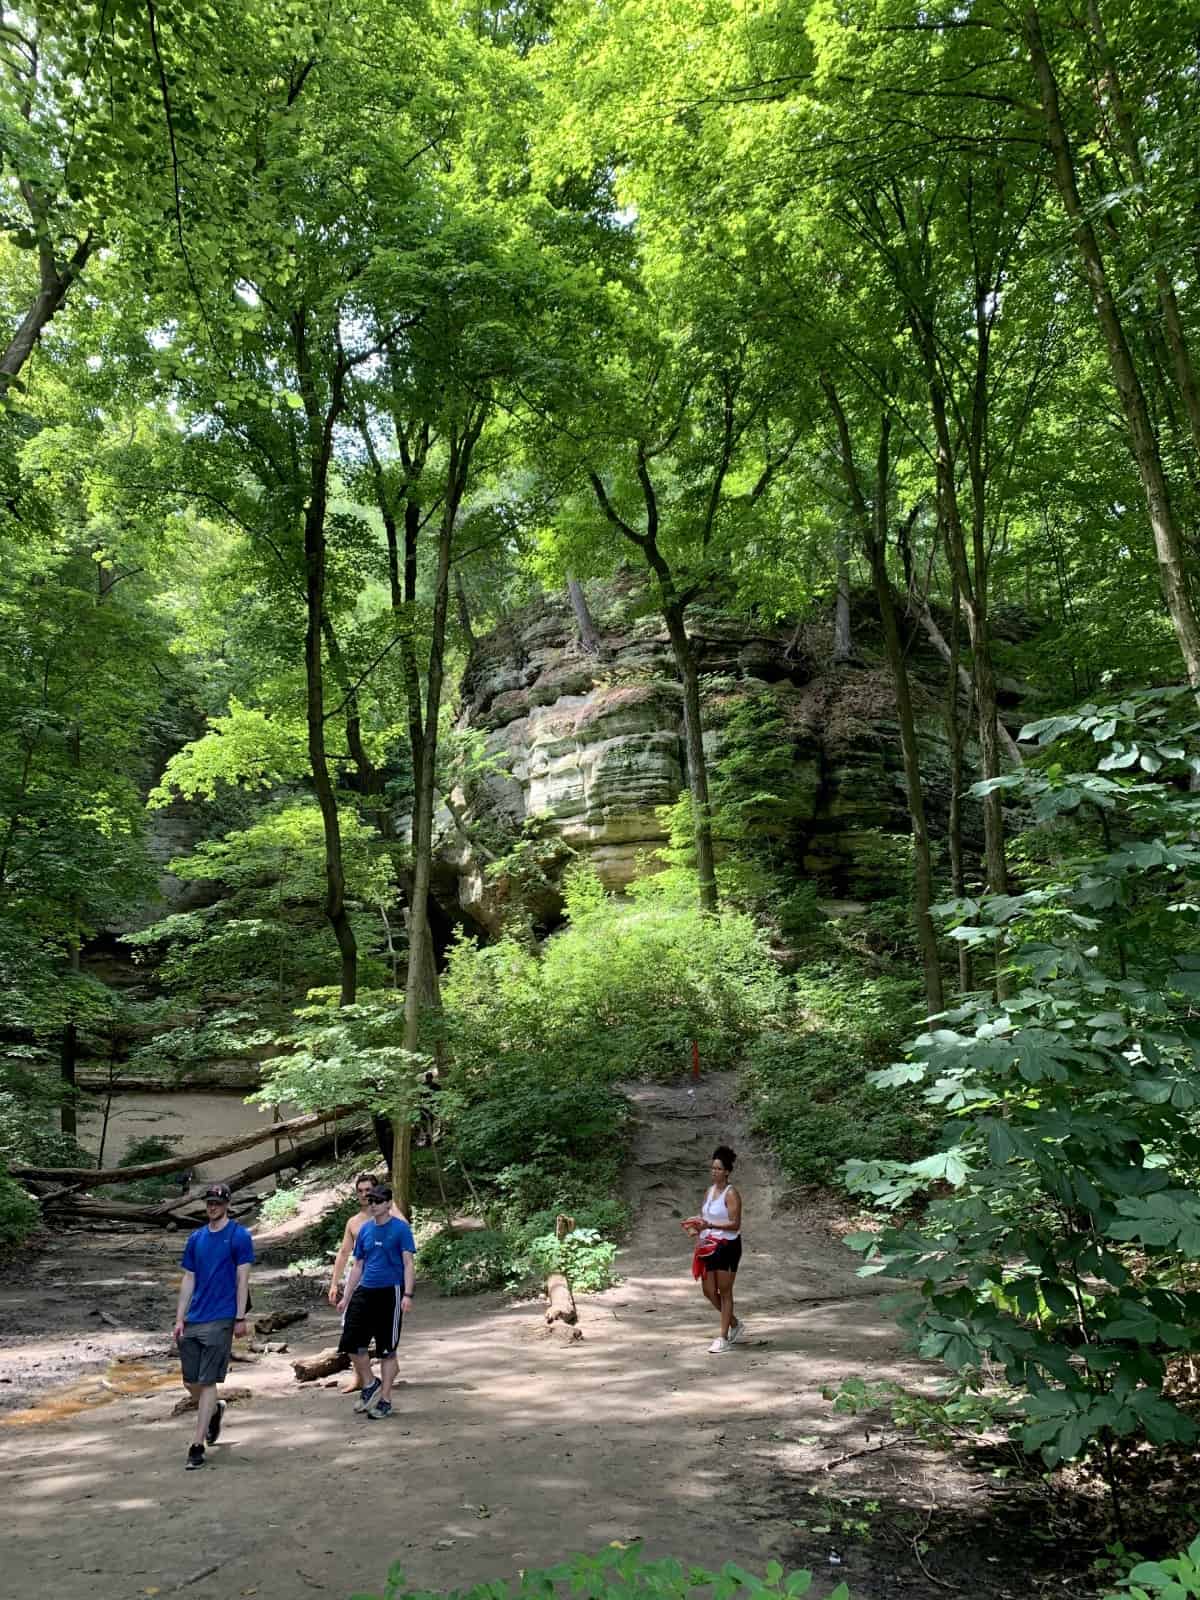 Discover Scenic Beauty: Top 20 Day Trips from Chicago - Natural Wonders and Hiking Trails at Starved Rock State Park